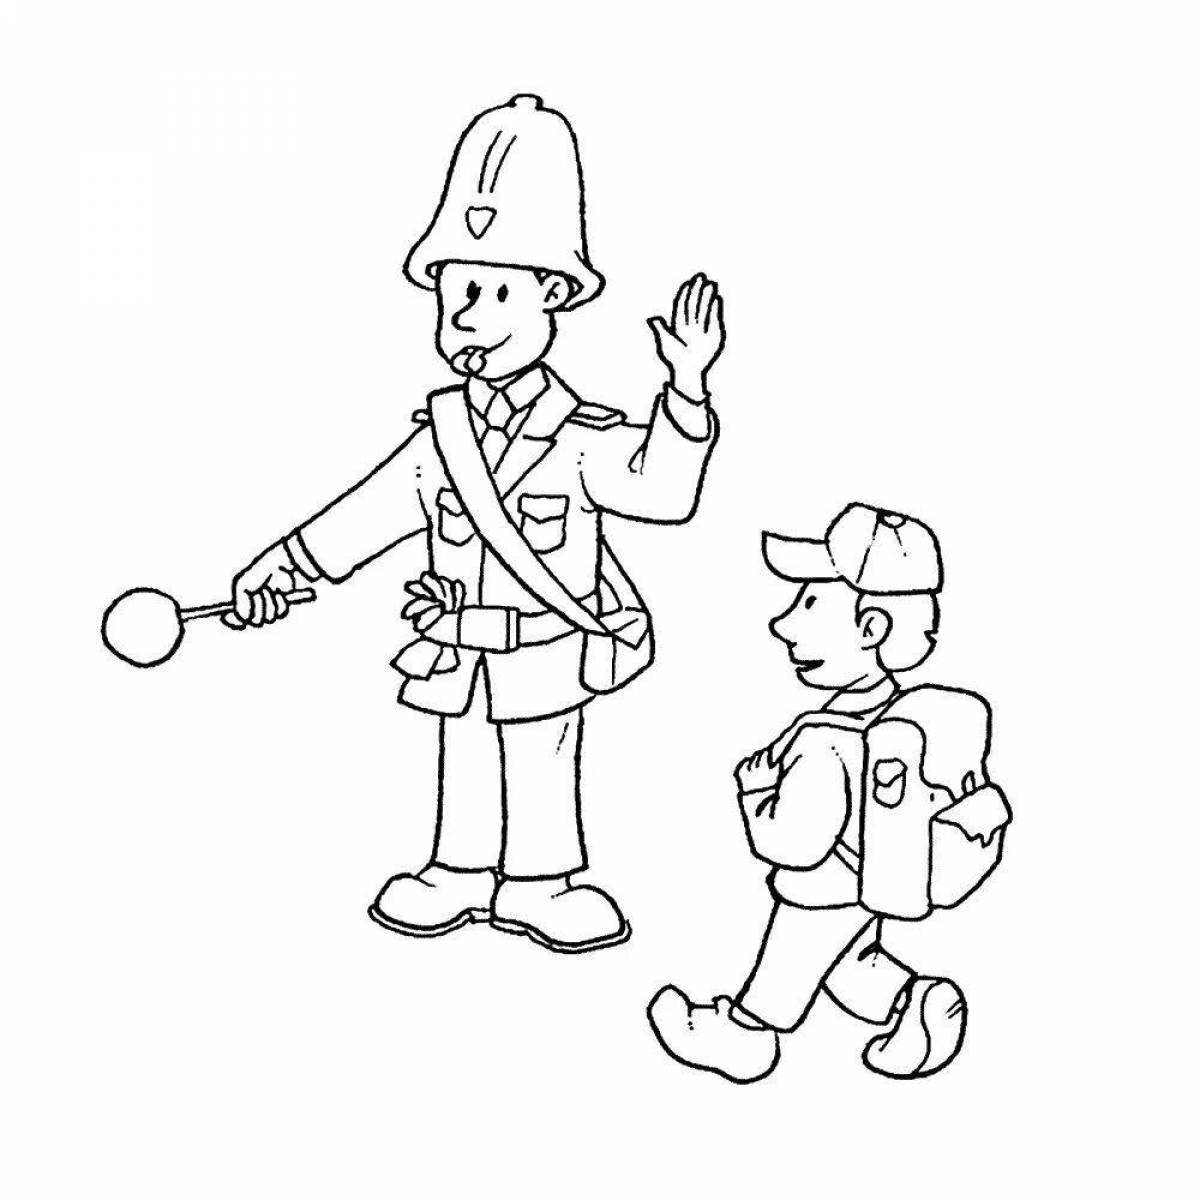 Live traffic controller coloring page for toddlers